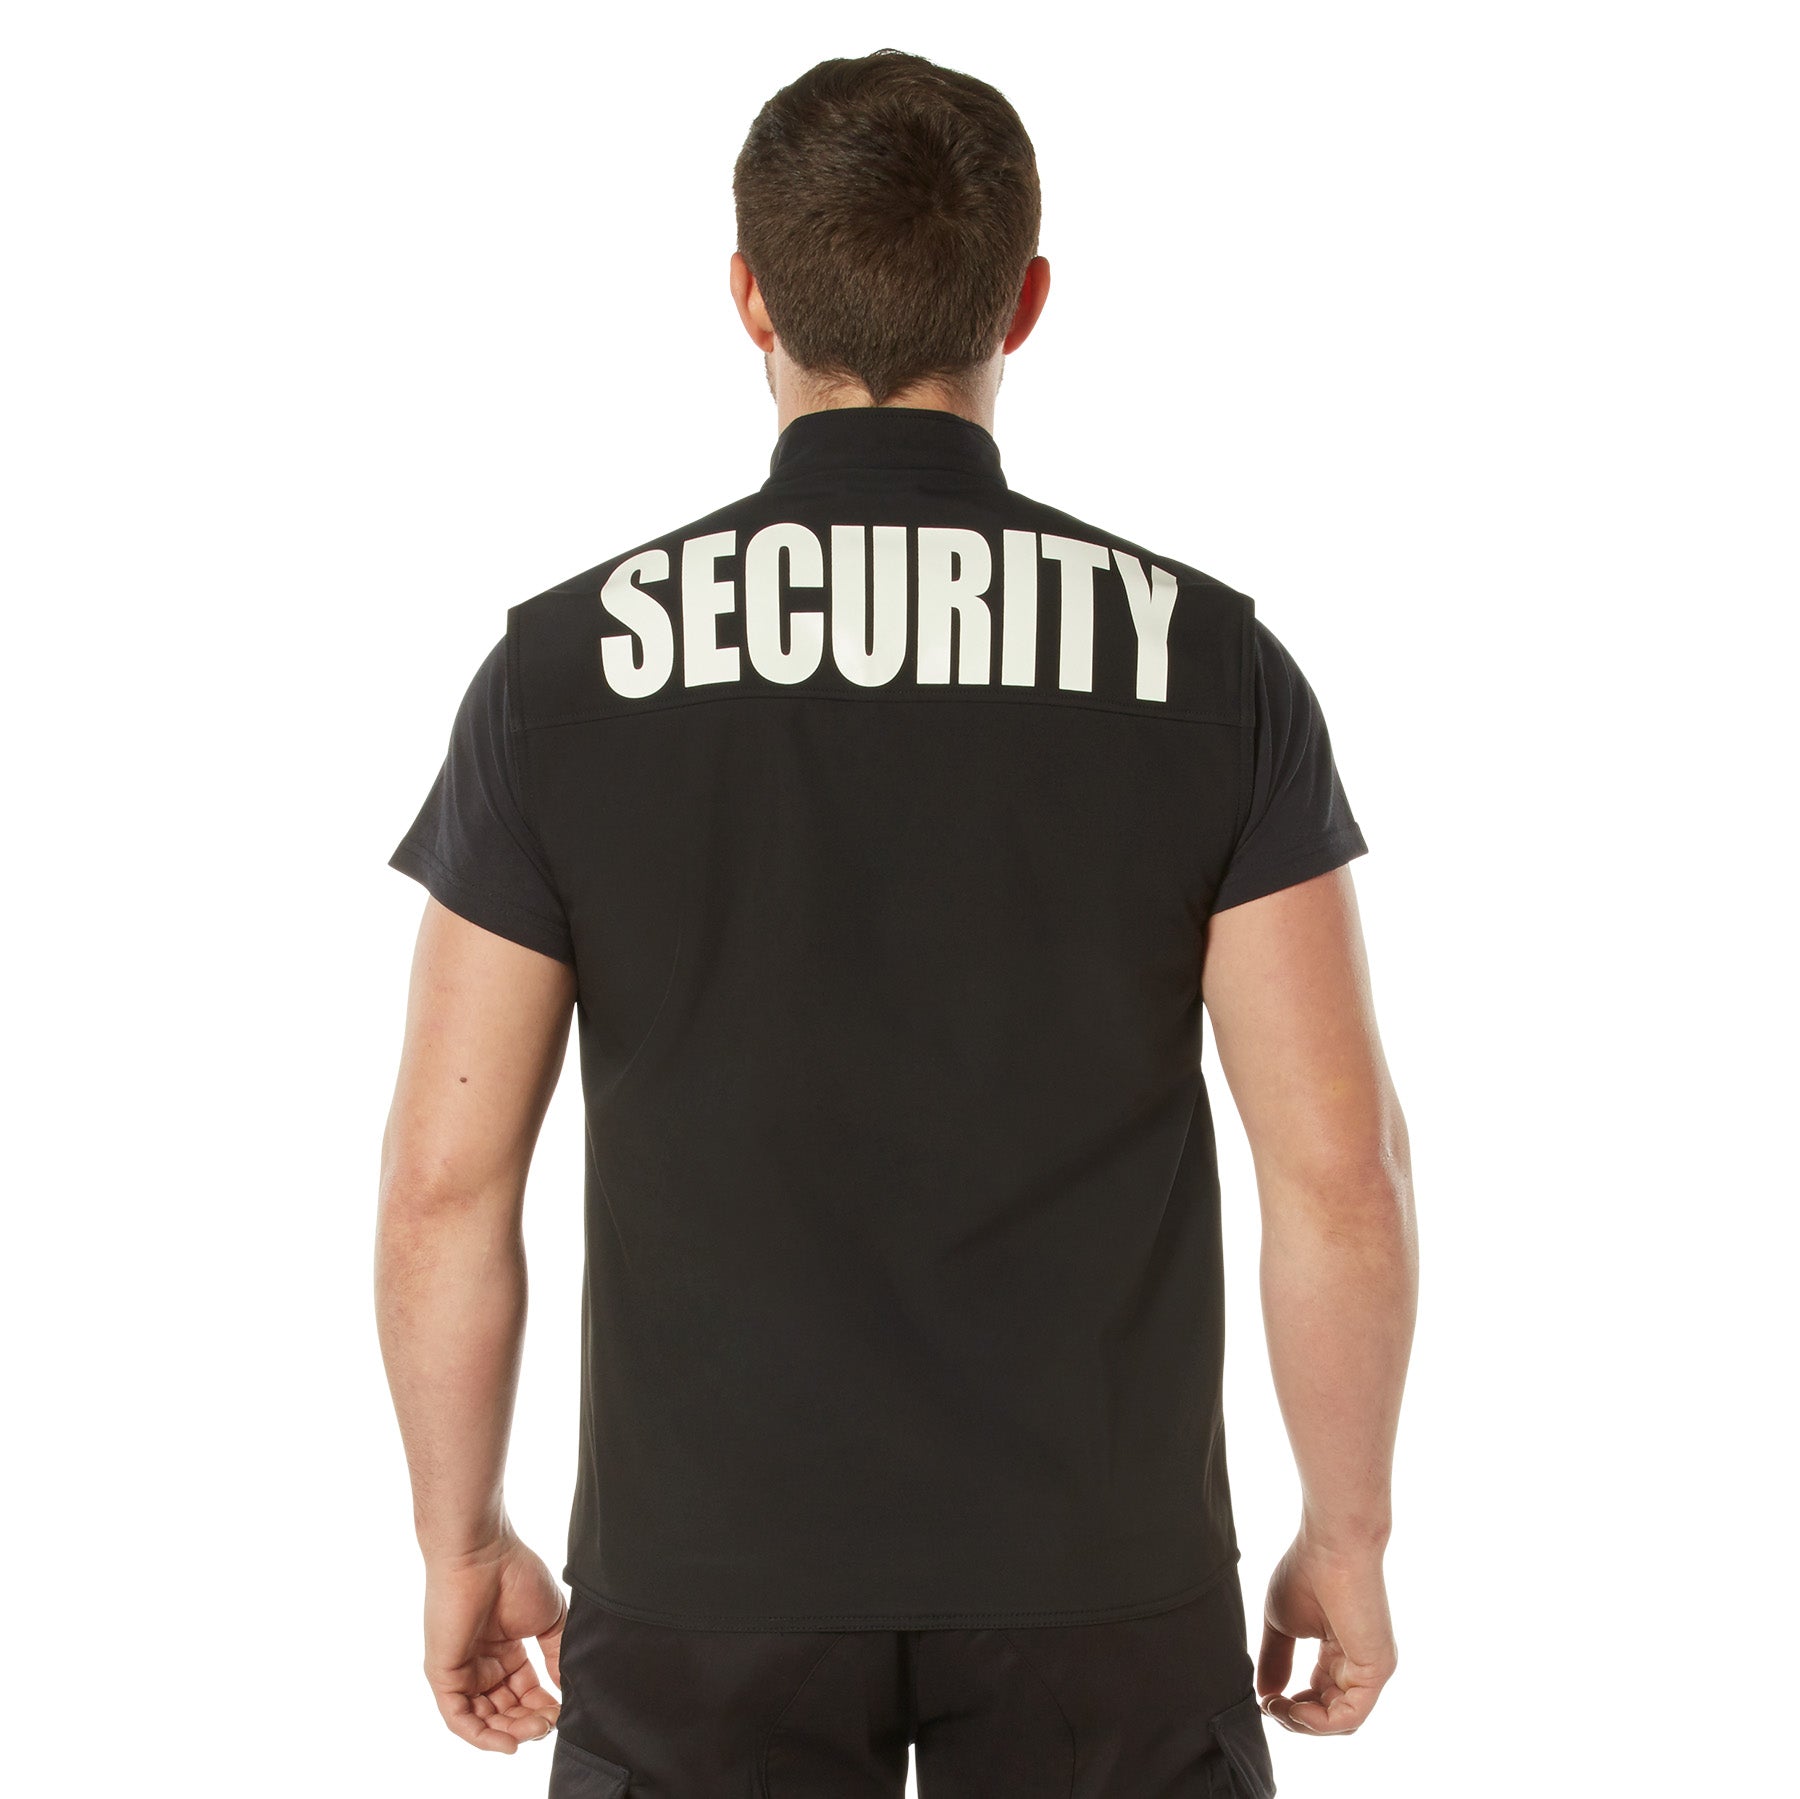 [Public Safety] Poly Security Concealed Carry Soft Shell Vests